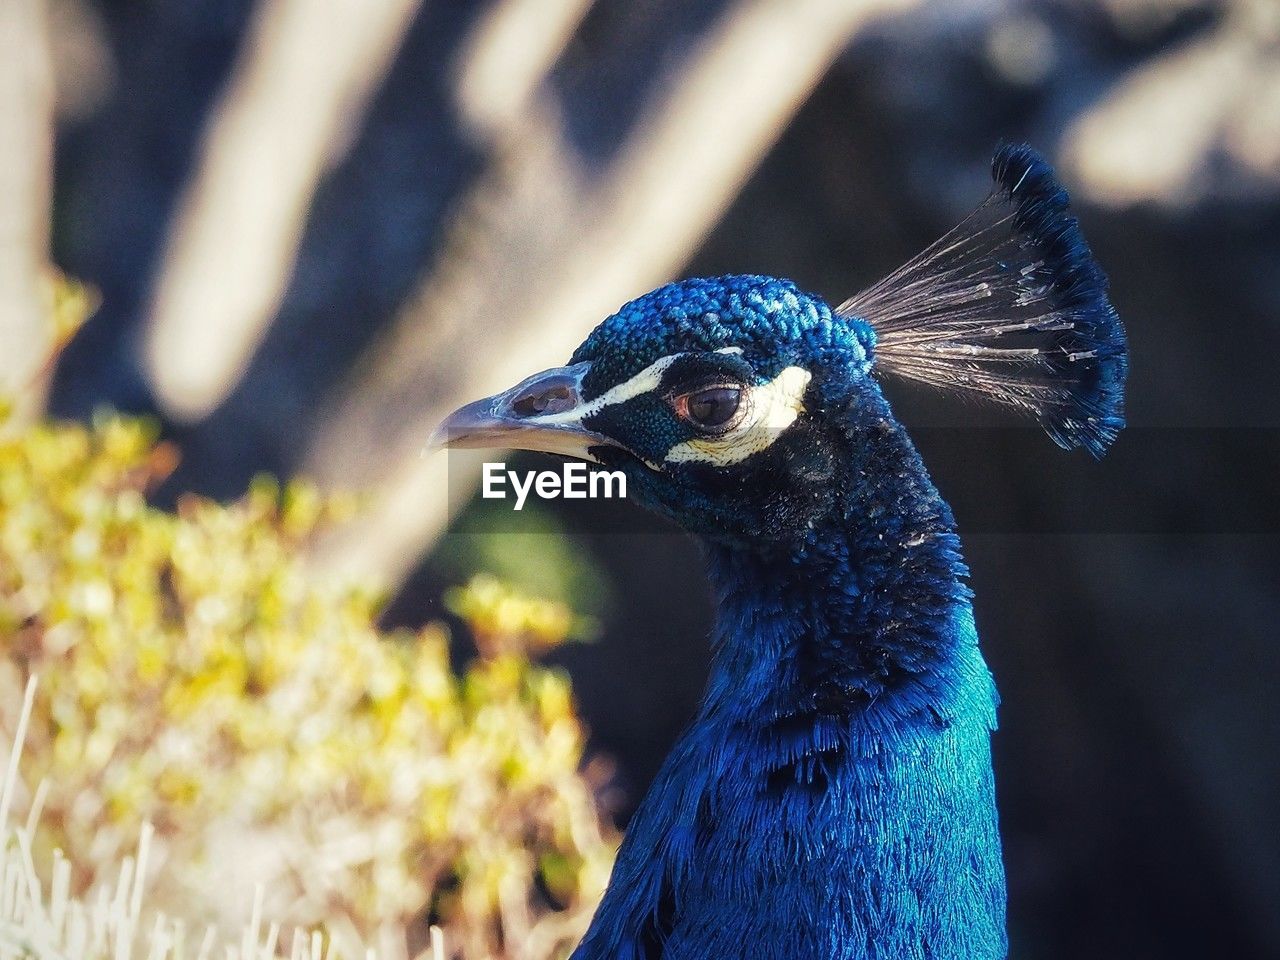 animal themes, animal, bird, animal wildlife, one animal, blue, peacock, wildlife, nature, beak, close-up, animal body part, feather, no people, beauty in nature, animal head, outdoors, multi colored, peacock feather, portrait, focus on foreground, day